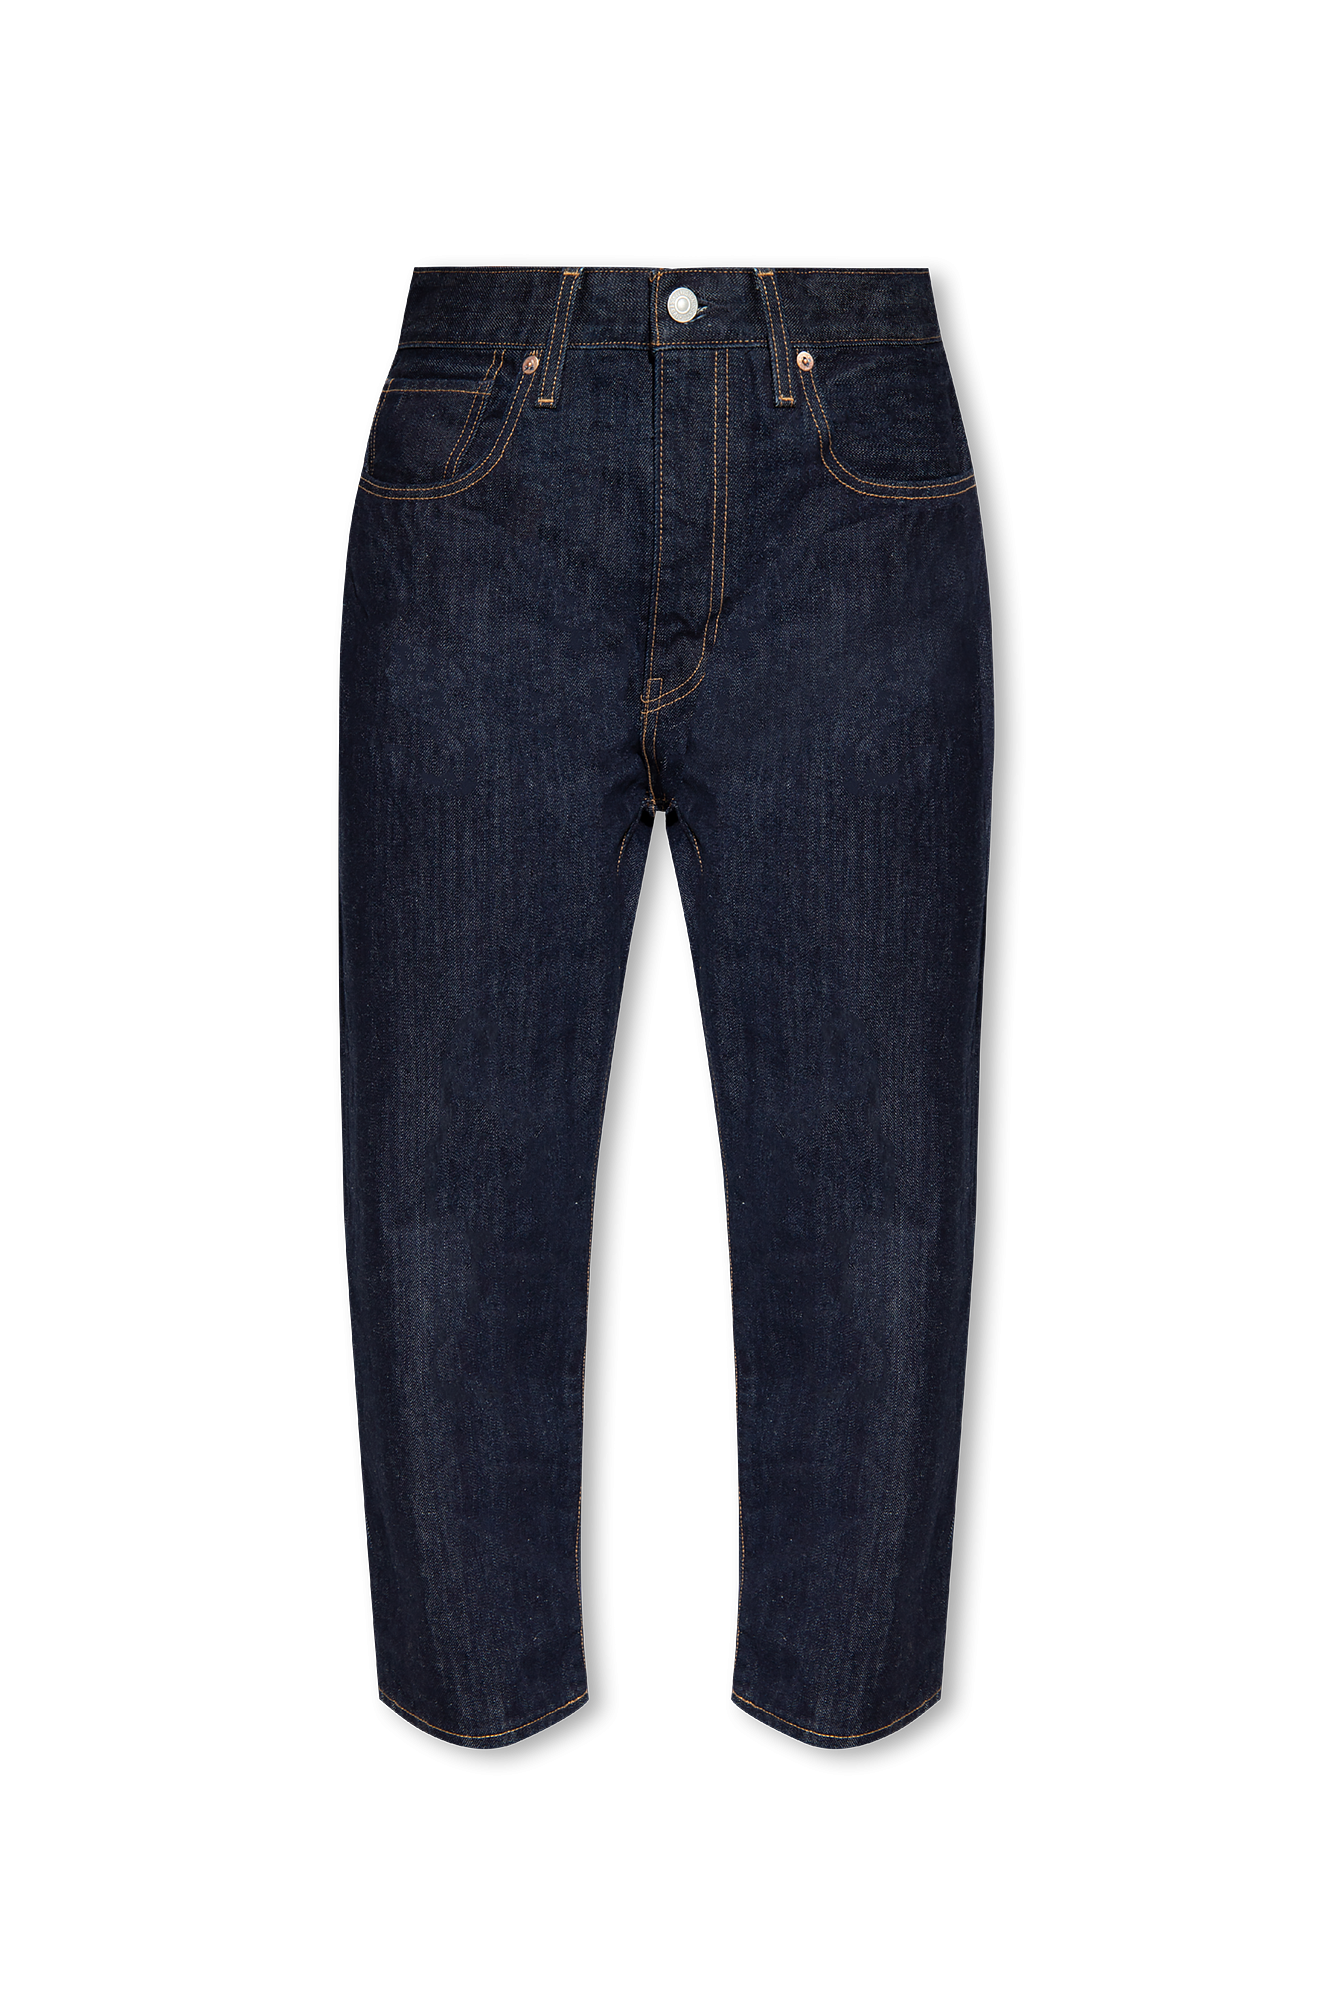 Levi's ‘Barrel’ relaxed-fitting jeans | Women's Clothing | Vitkac